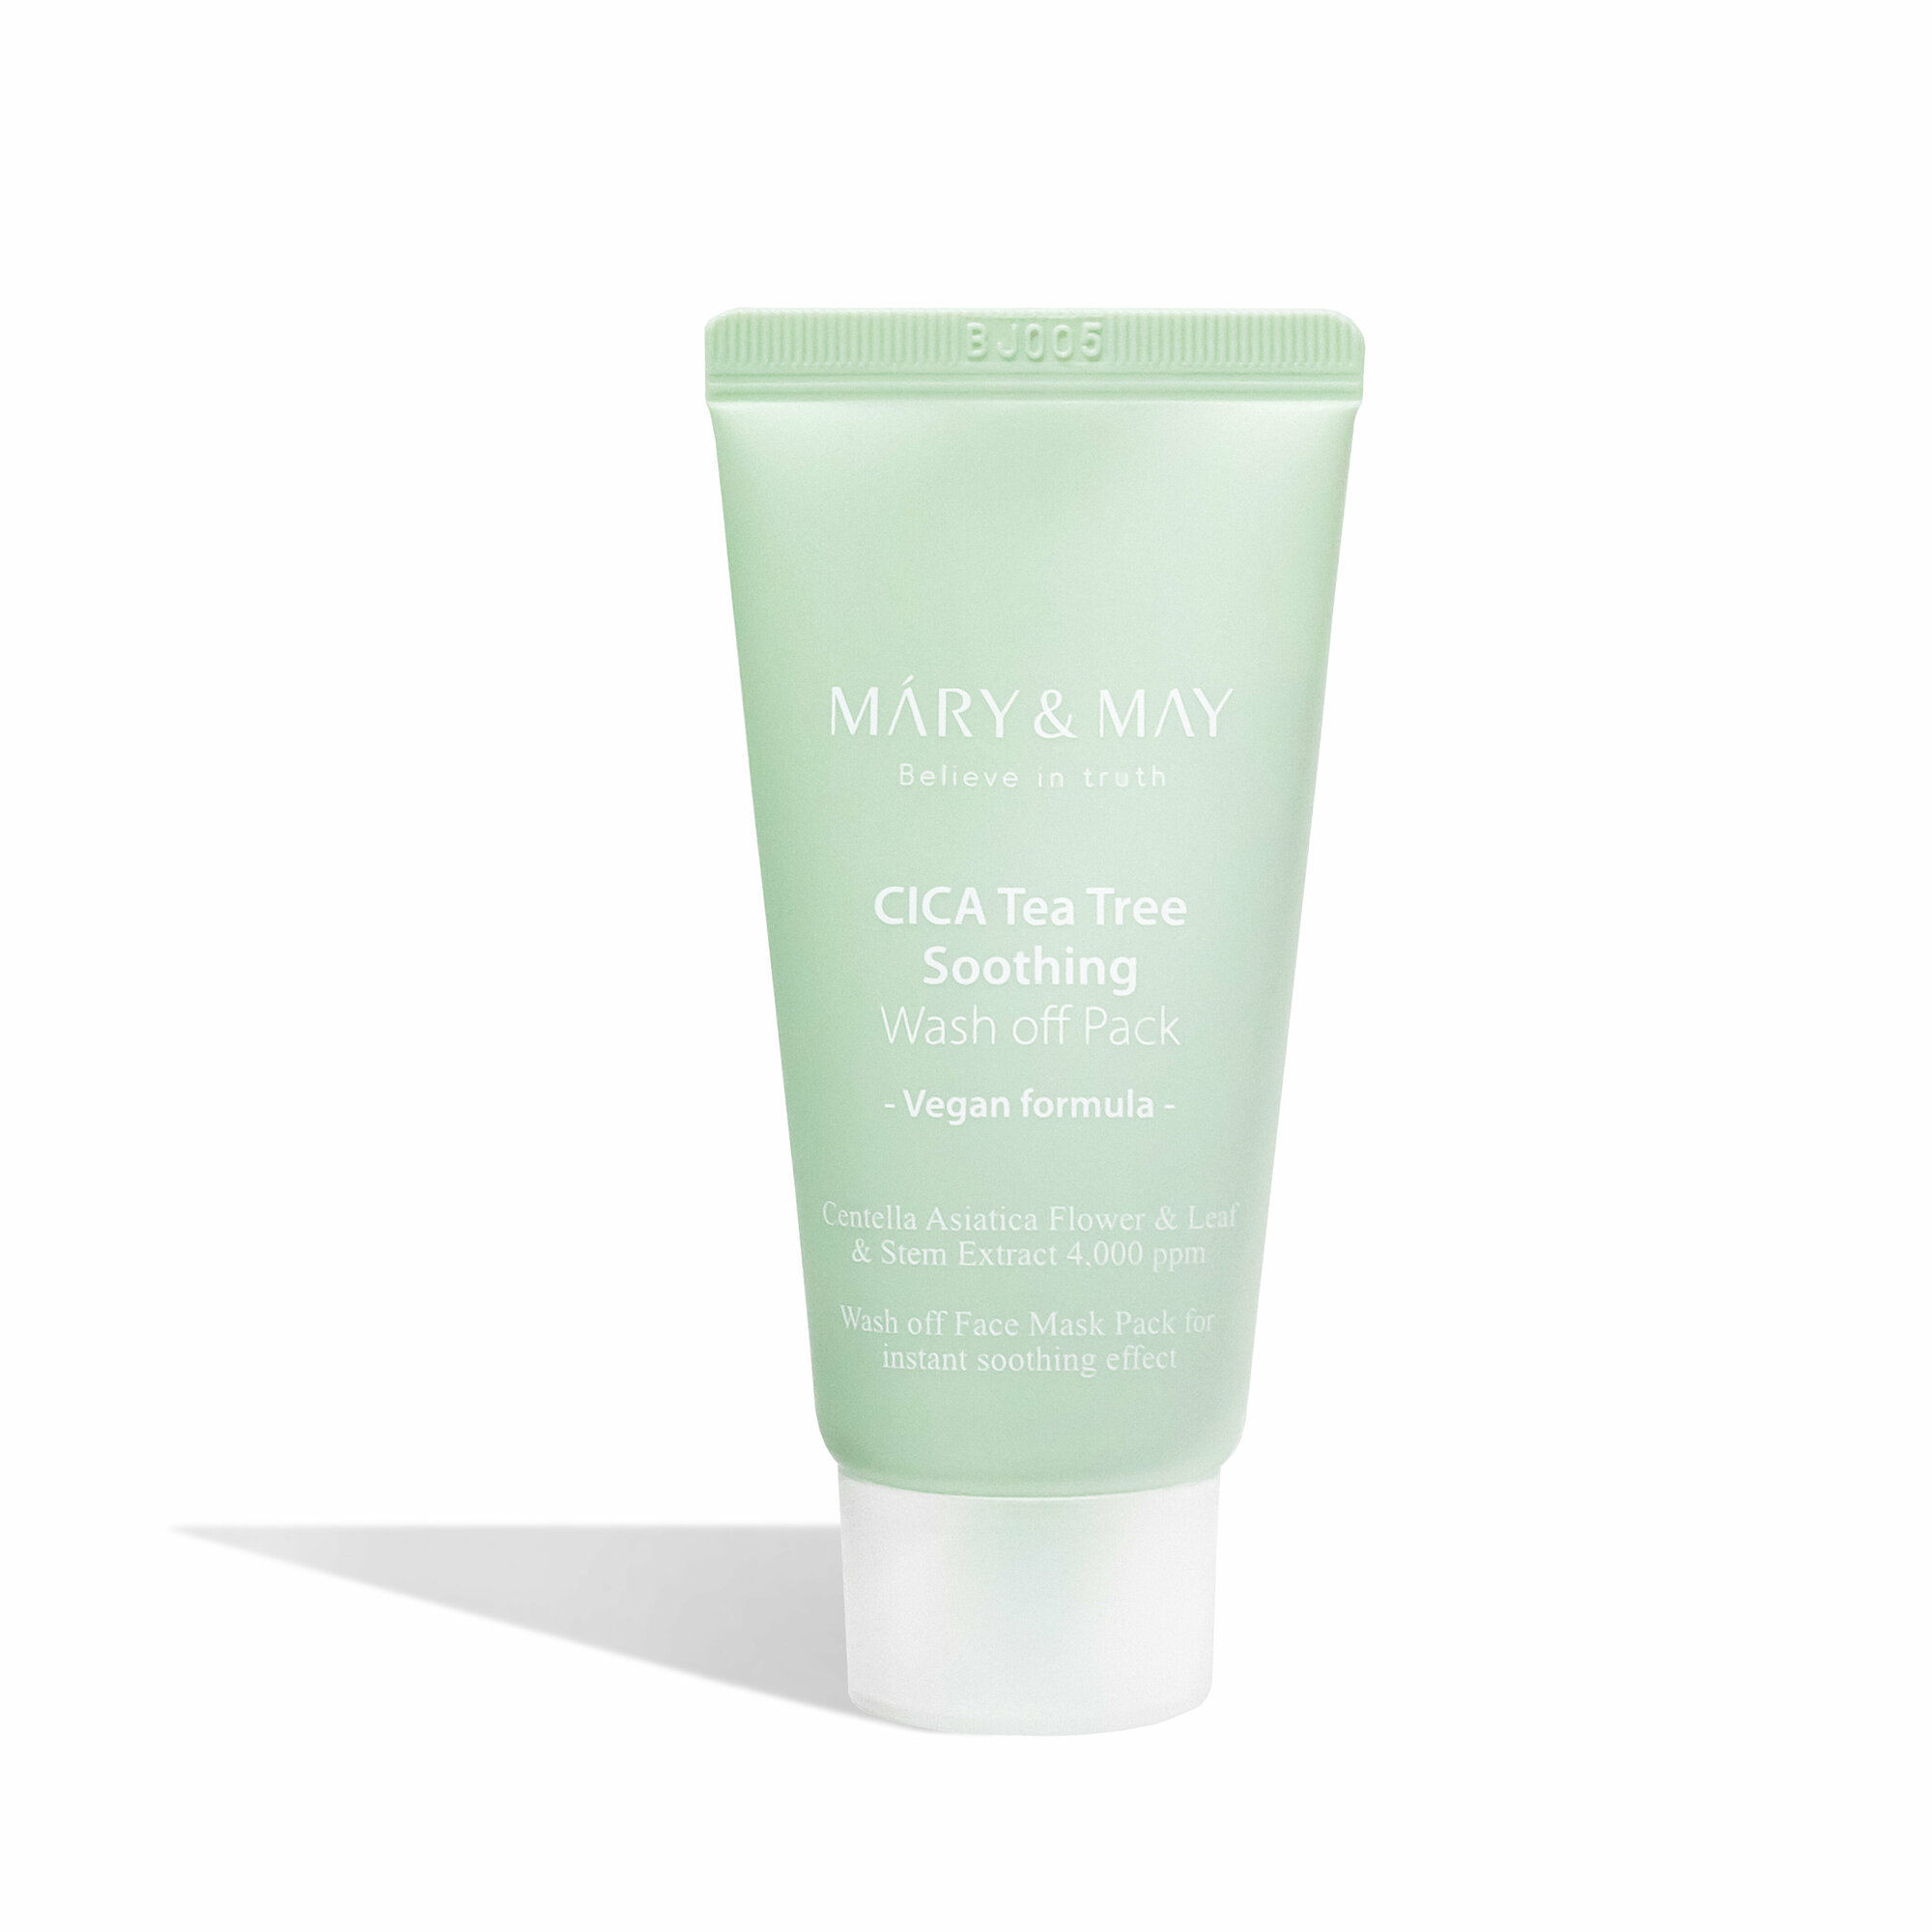 Маска для лица глиняная | Mary&May Cica TeaTree Soothing Wash off Pack 30g